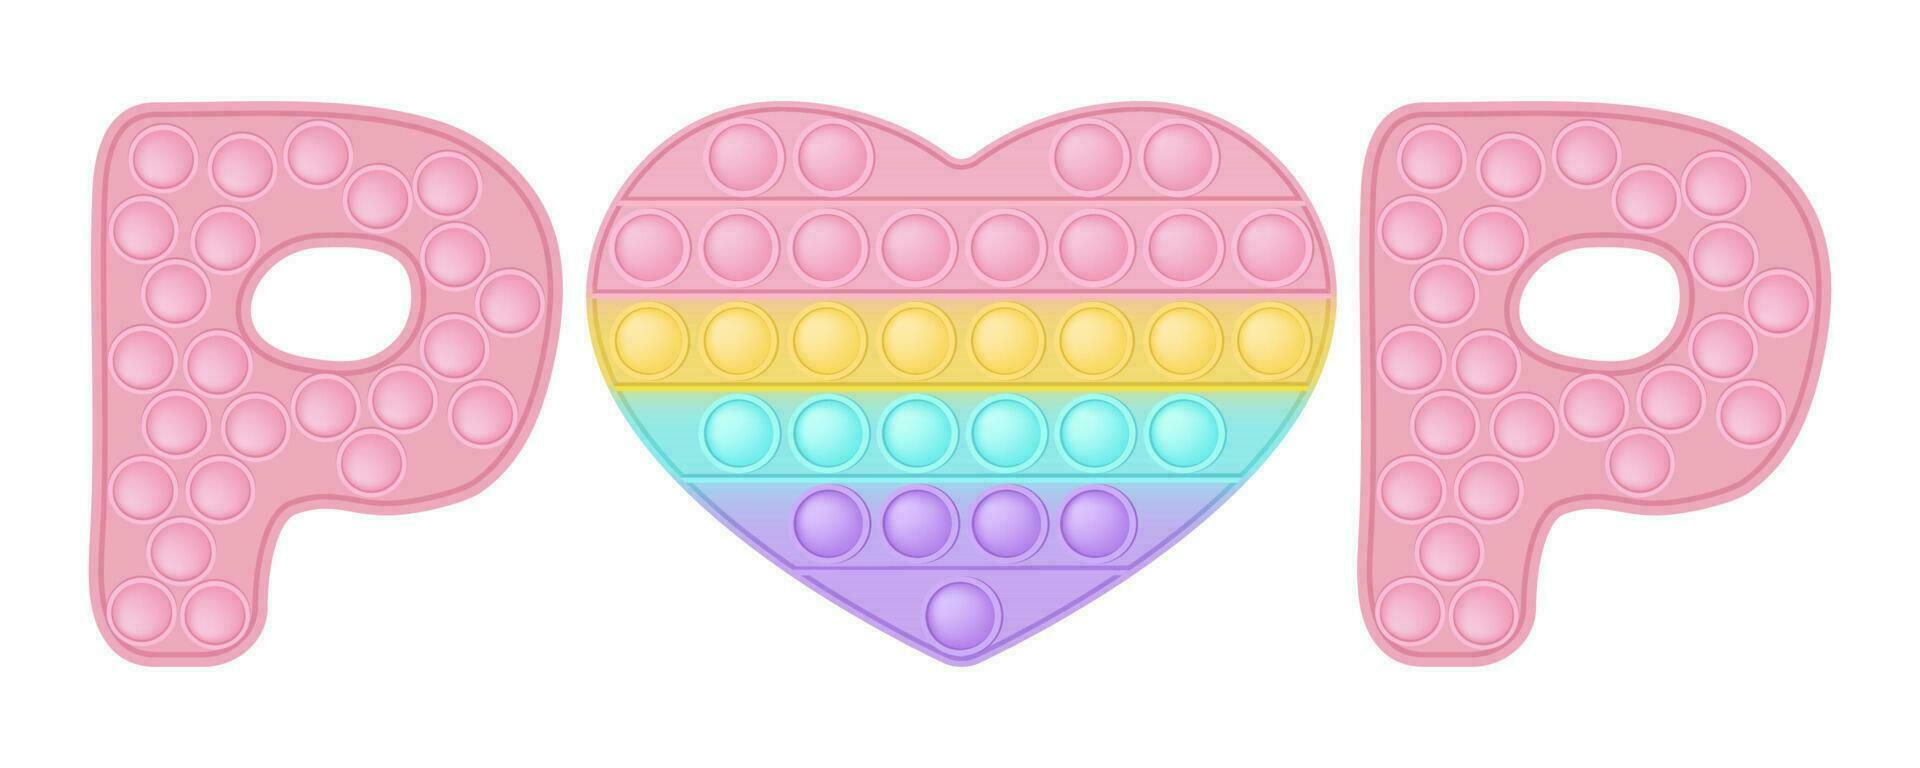 Popping toy love sign with heart icon symbol of Valentines Day. The figure of heart is pink in color. Vector banner on white.